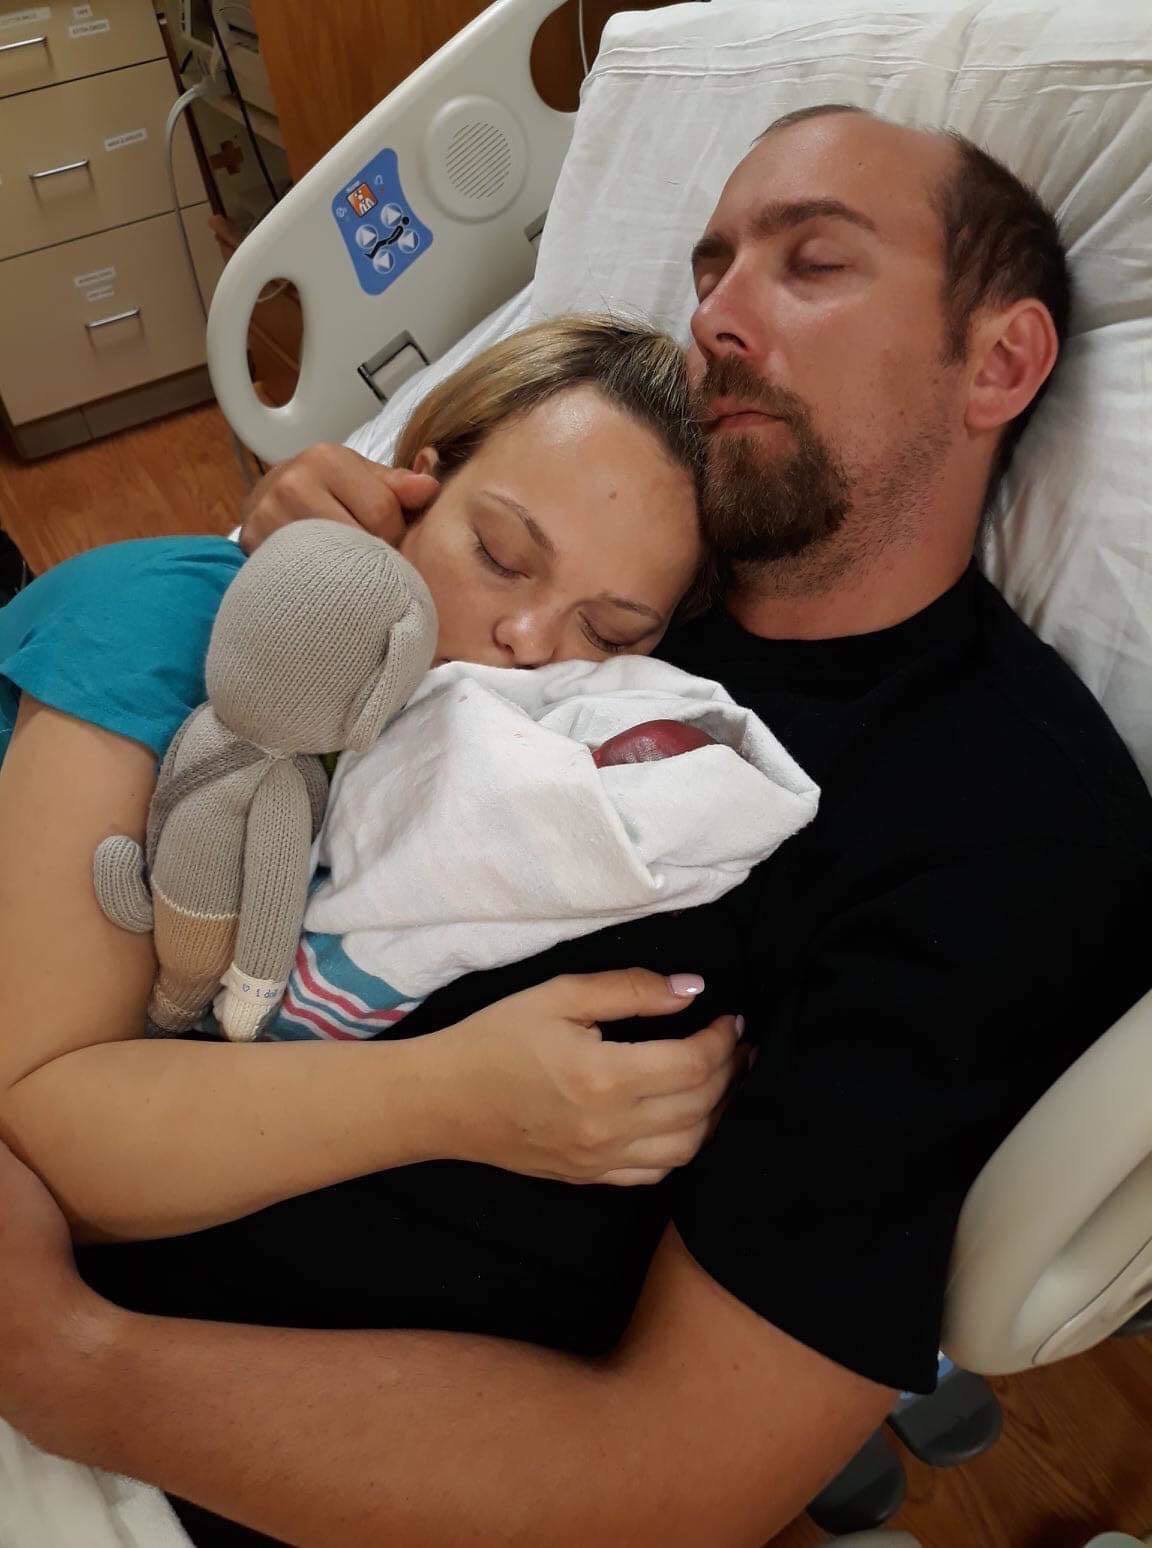 After their son, James Oliver “Ollie” Sauls was born sleeping, Britni and Zach Sauls purchased a Caring Cradle, which helps preserve a baby’s body, for the hospital. Photo by Kari Bendig